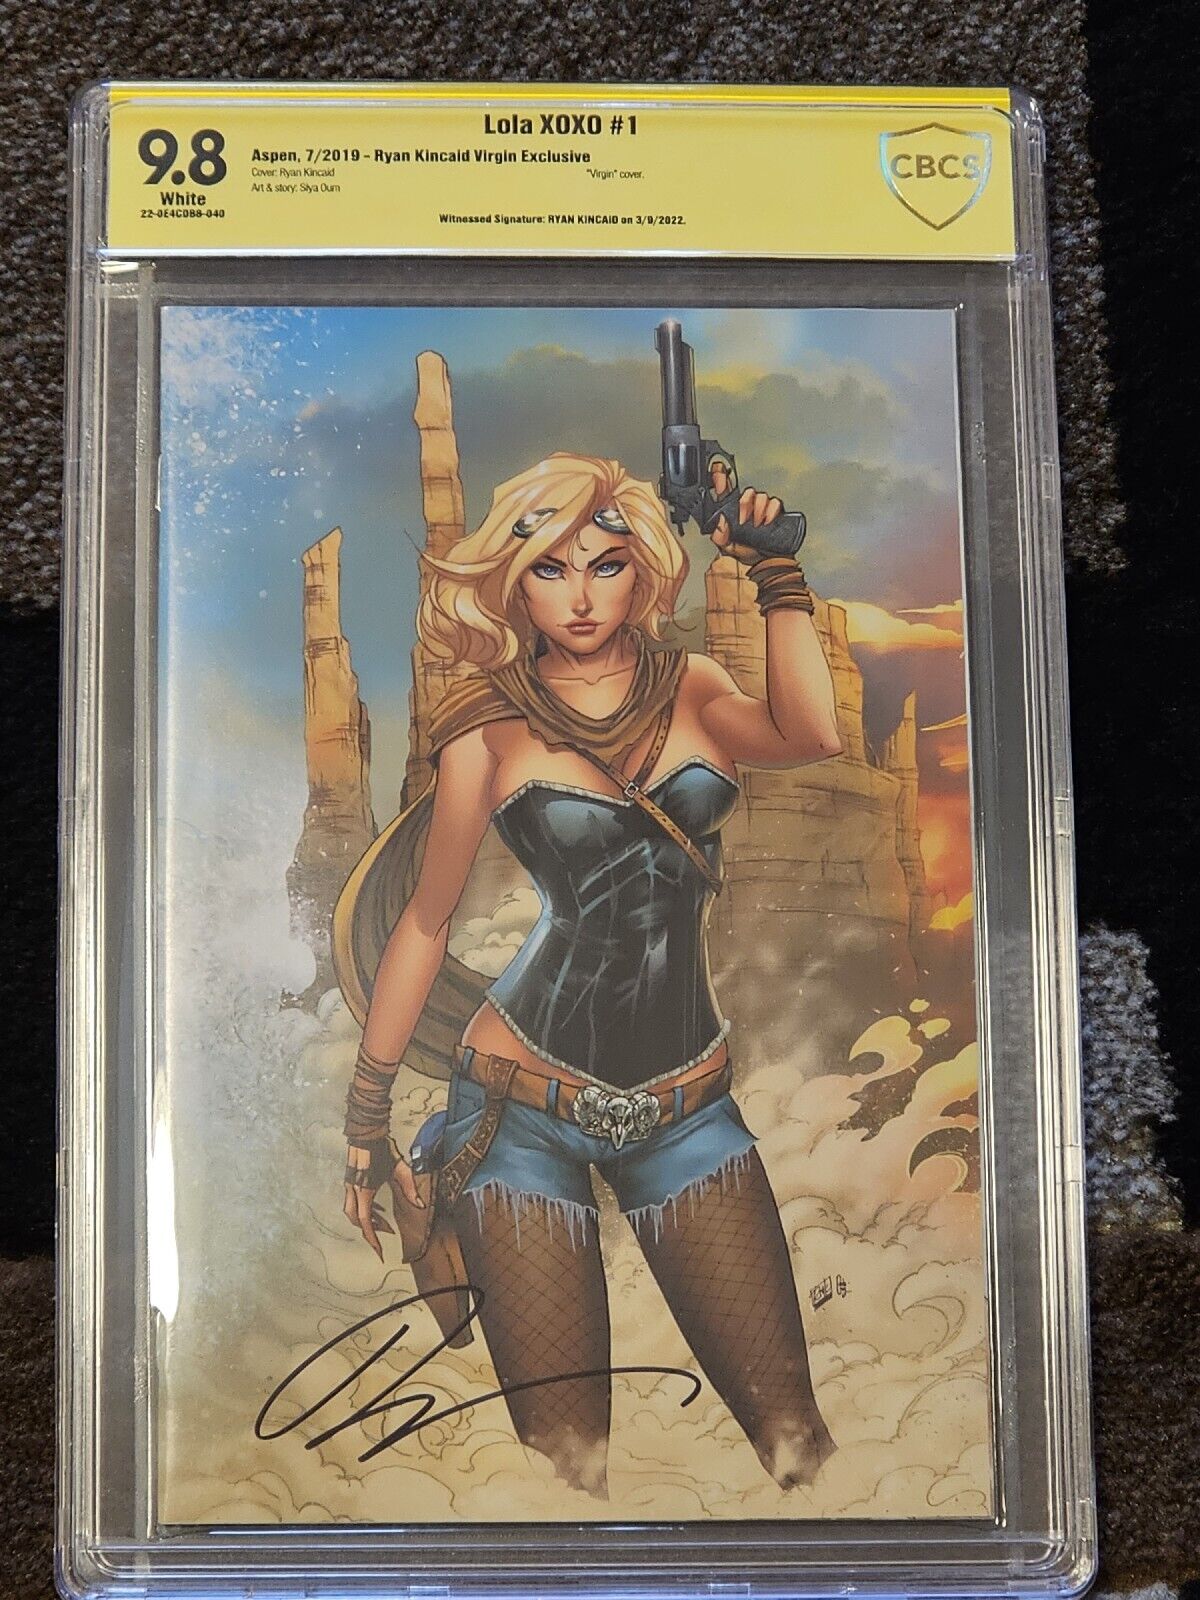 Lola XOXO #1 Ryan Kincaid Signed Limited to 200 Excl Virgin Variant CBCS 9.8